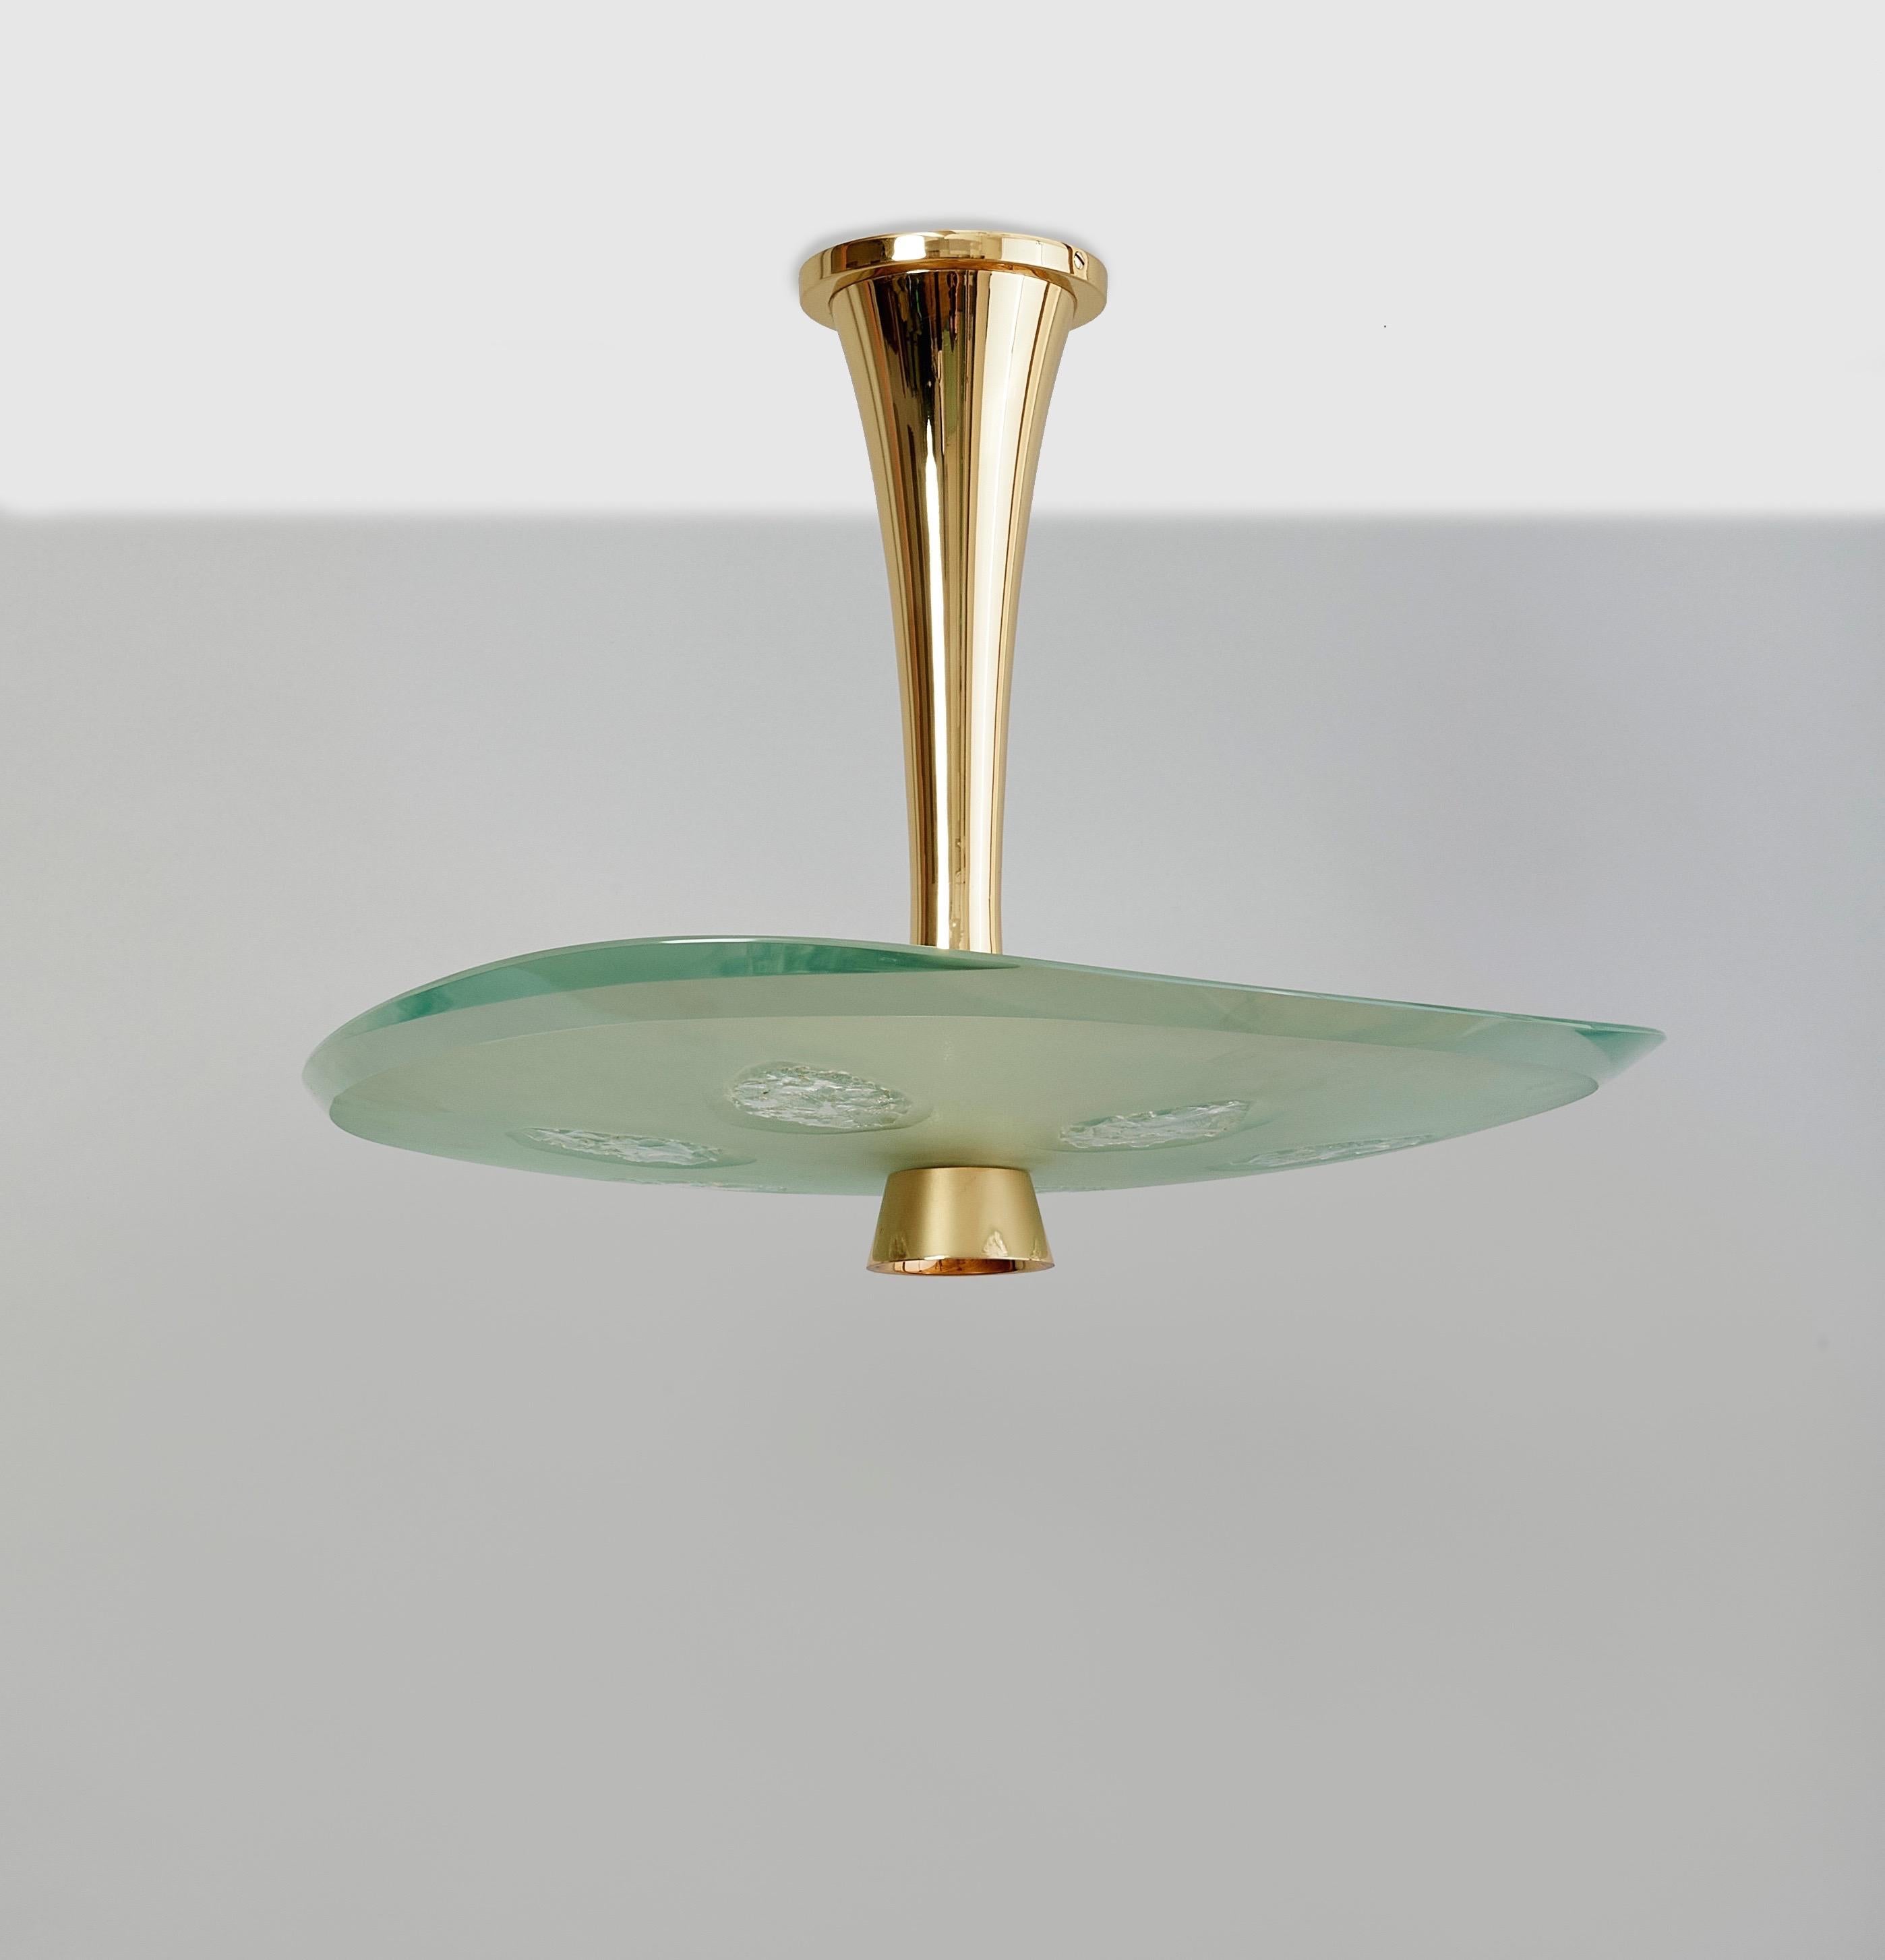 Polished Superb Max Ingrand for Fontana Arte Chandelier in Glass and Brass, Italy c. 1957